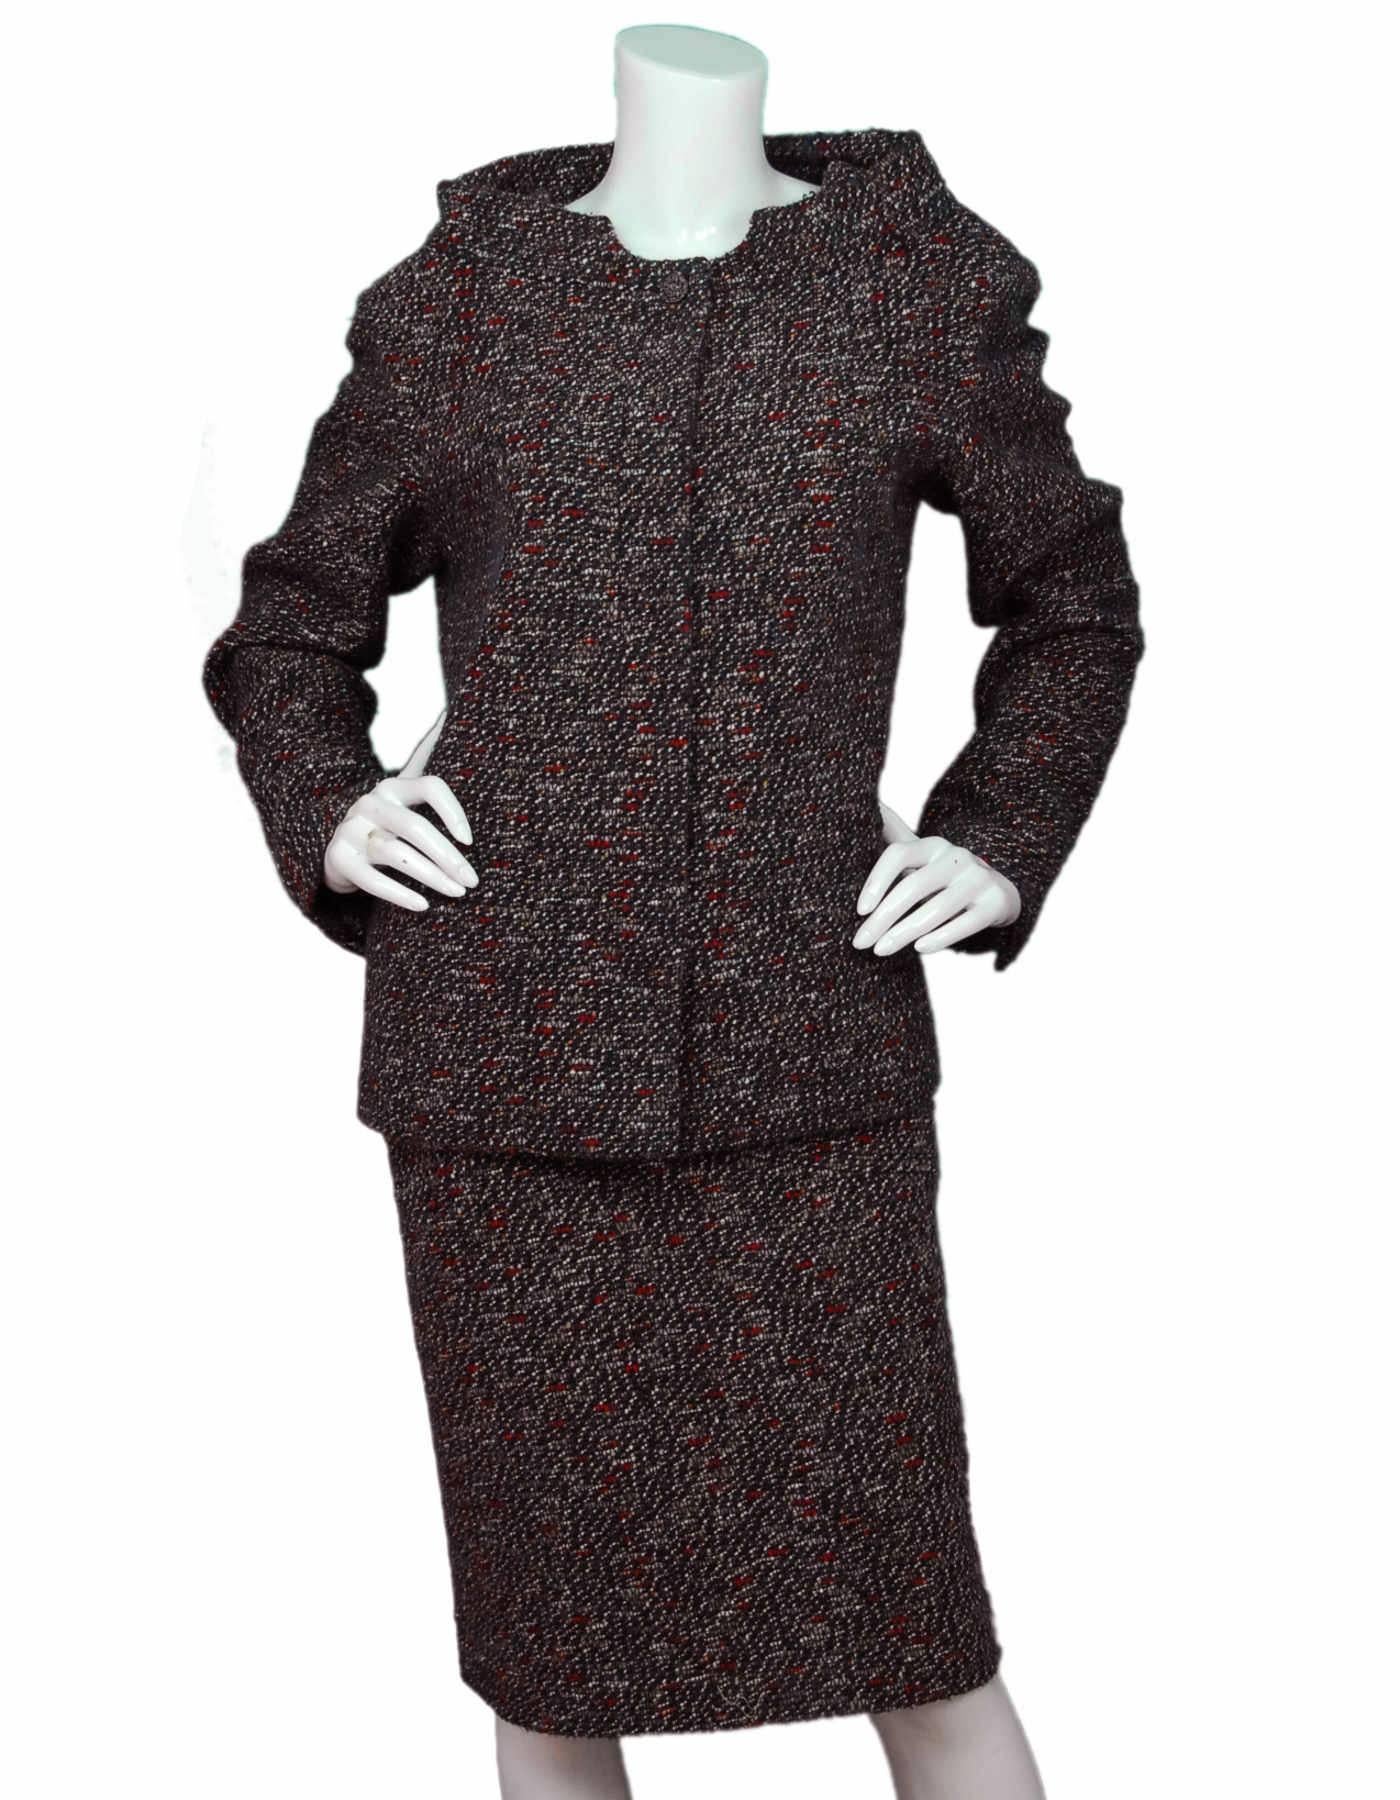 Chanel Fall '13 Runway Red & Navy Wool Skirt 

Made In: France
Color: Red, Navy, brown and white
Composition: 60% wool, 26% nylon, 7% mohair, 7% alpaca
Lining: Navy, 100% silk
Closure/Opening: Back center zipper
Exterior Pockets: Two hip